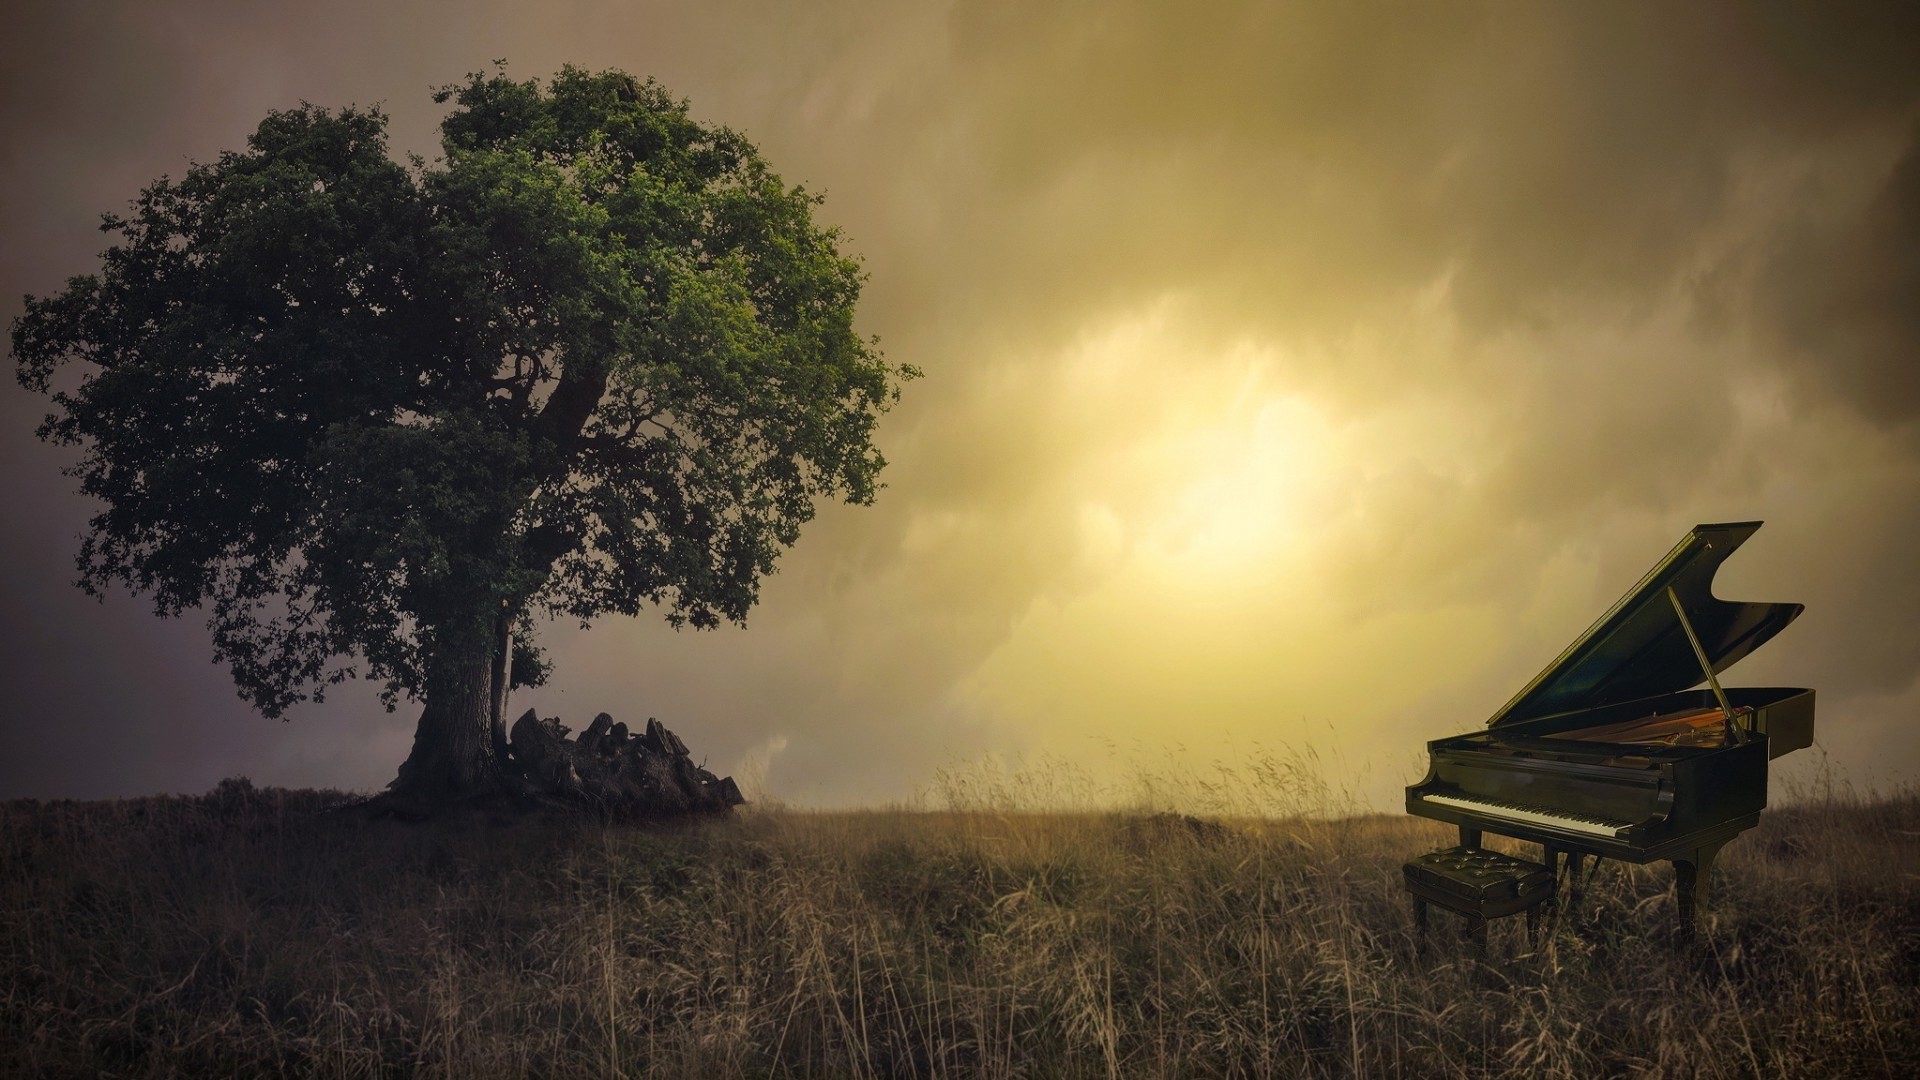 nature, Trees, Branch, Leaves, Photo Manipulation, Piano, Field, Sun, Clouds, Grass, Chair Wallpaper